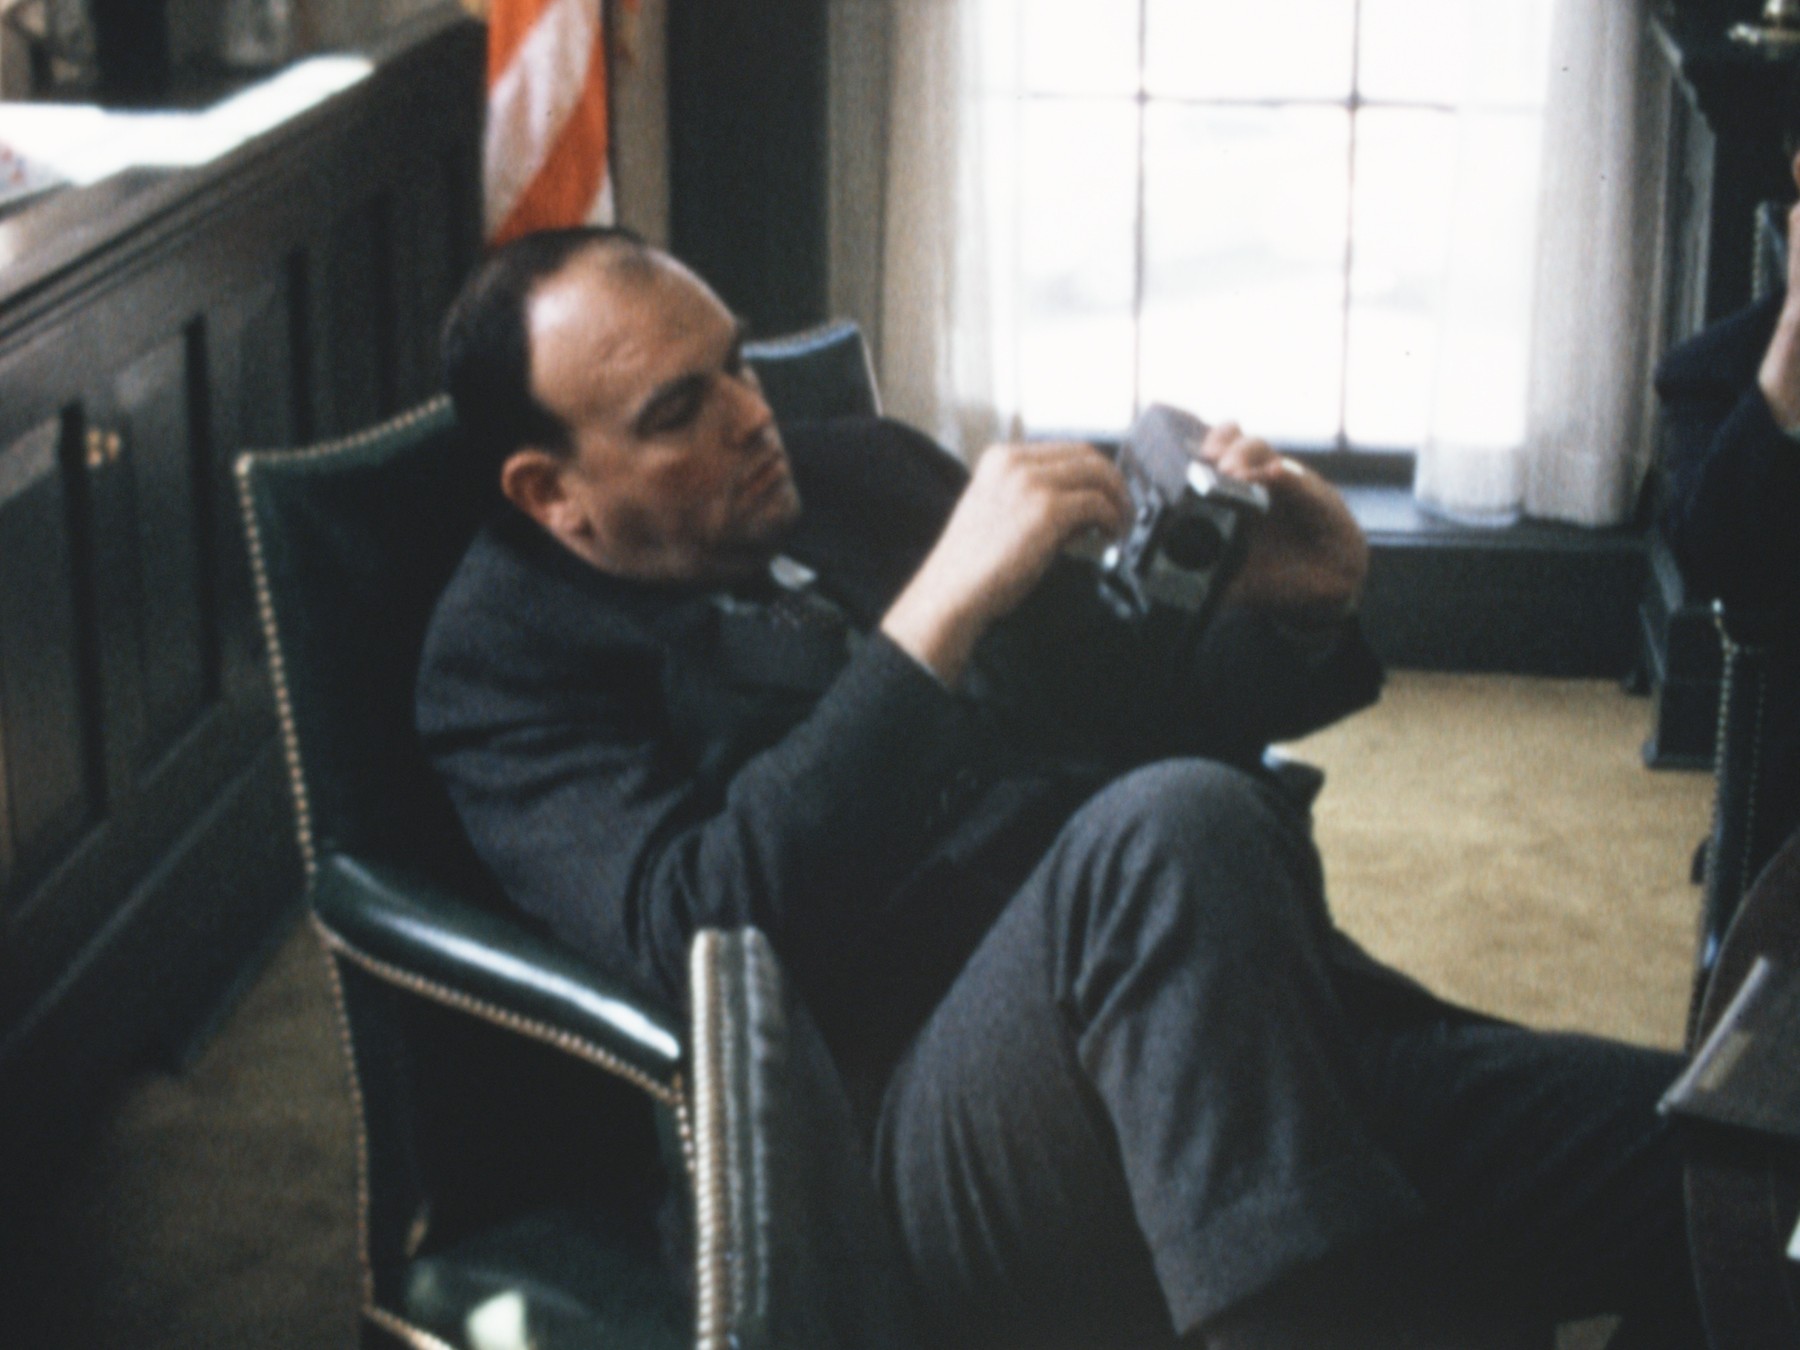 Chief Domestic Advisor John Ehrlichman fiddles with his Super 8 camera during a particularly boring staff meeting at the White House